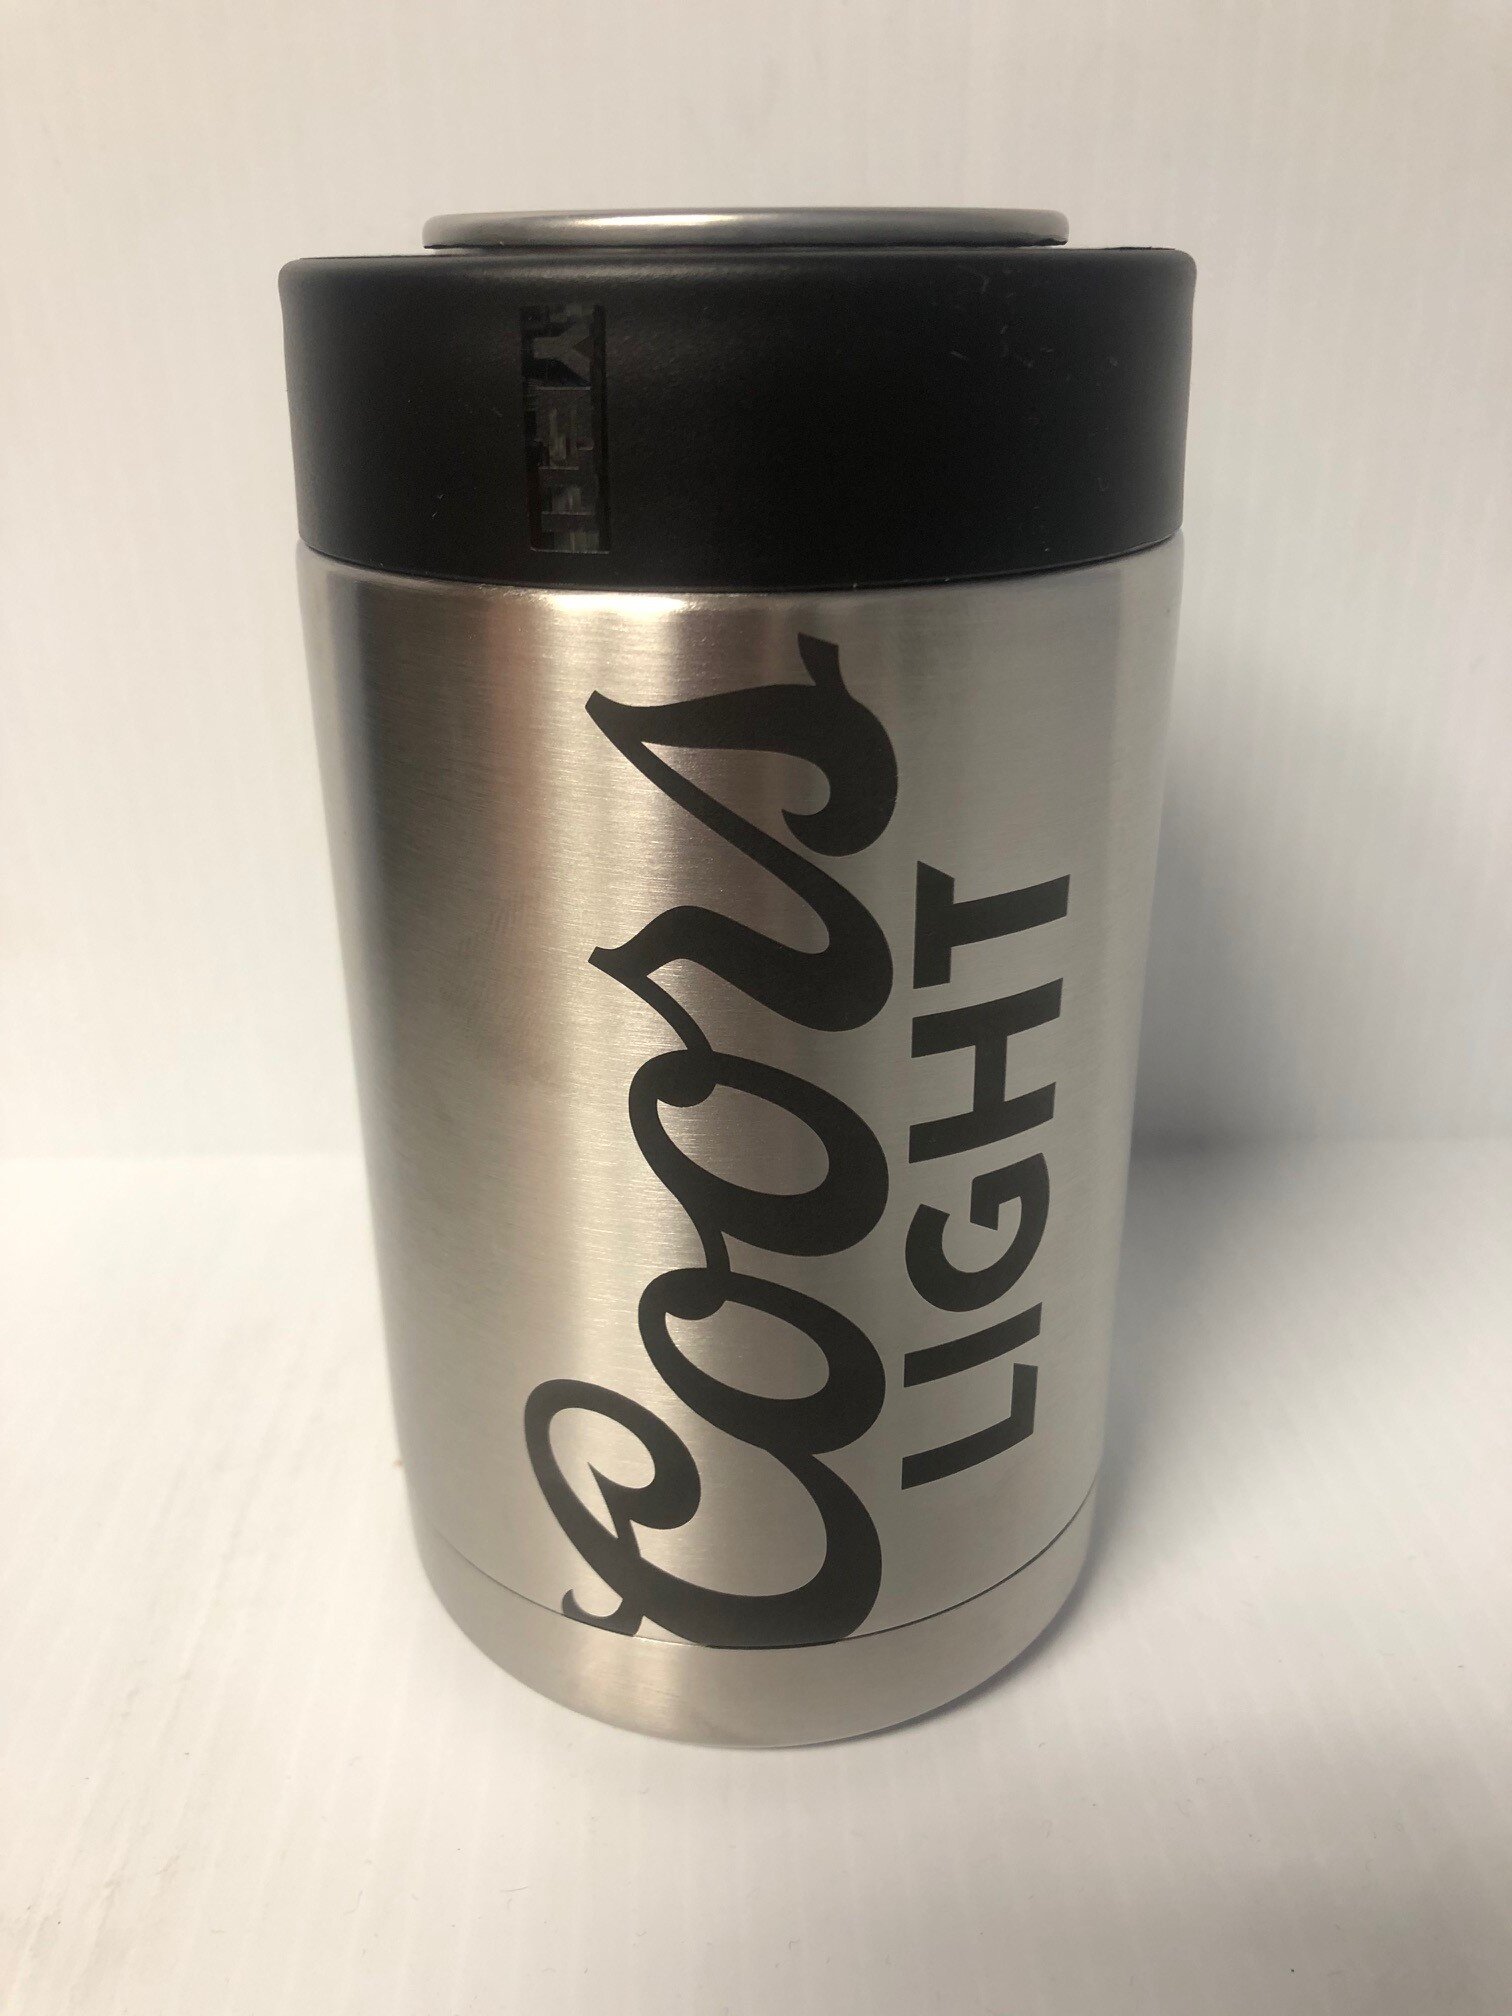 New Koozies home depot college game day COORS LIGHT beer koozies 